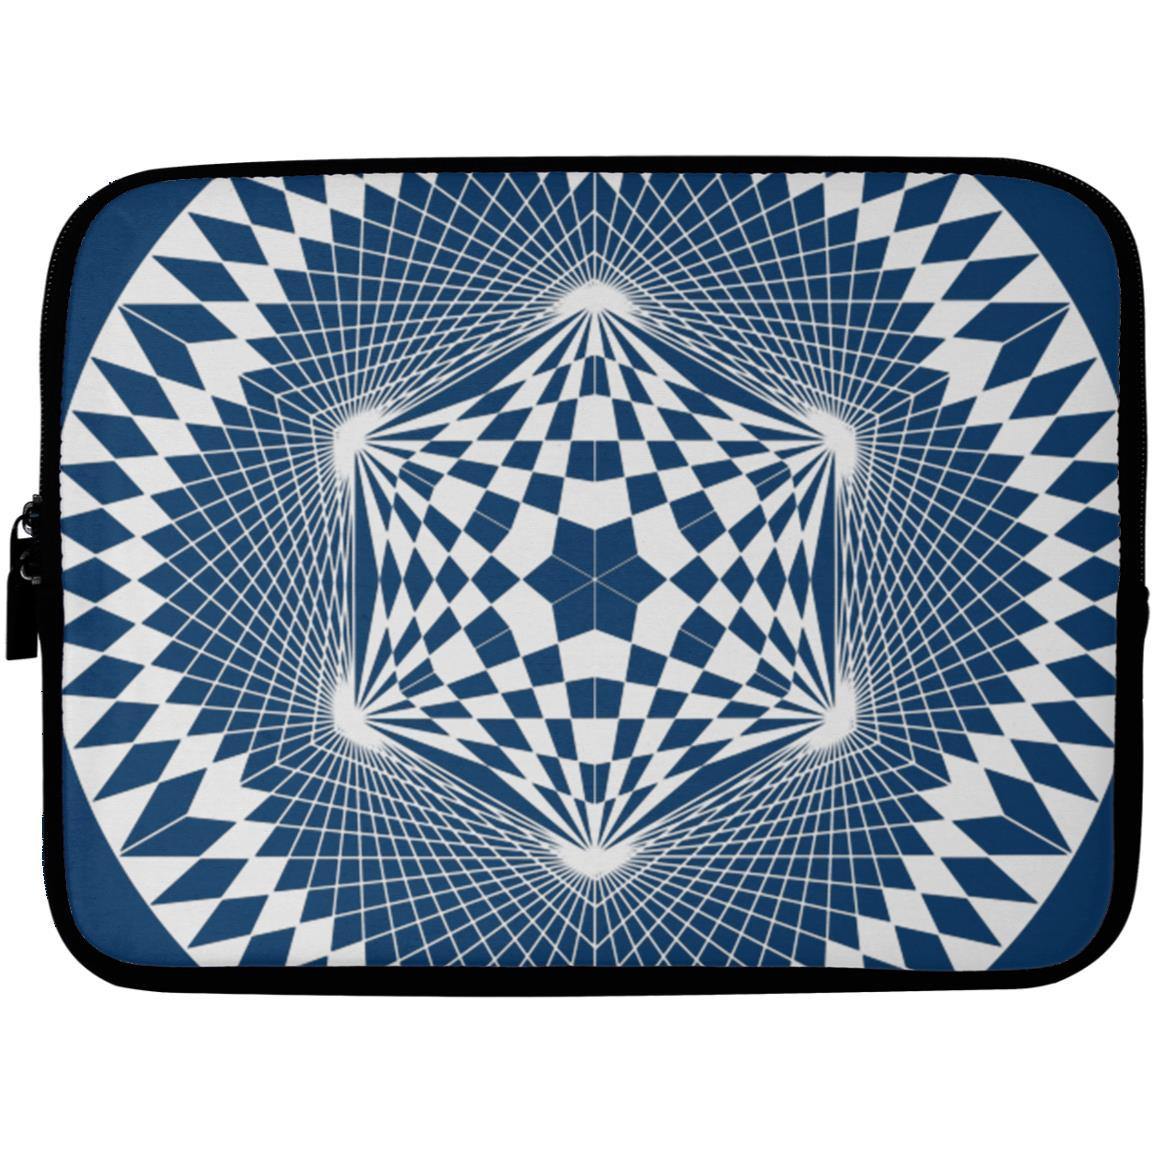 Crop Circle Laptop Sleeve - Windmill Hill 4 - Shapes of Wisdom